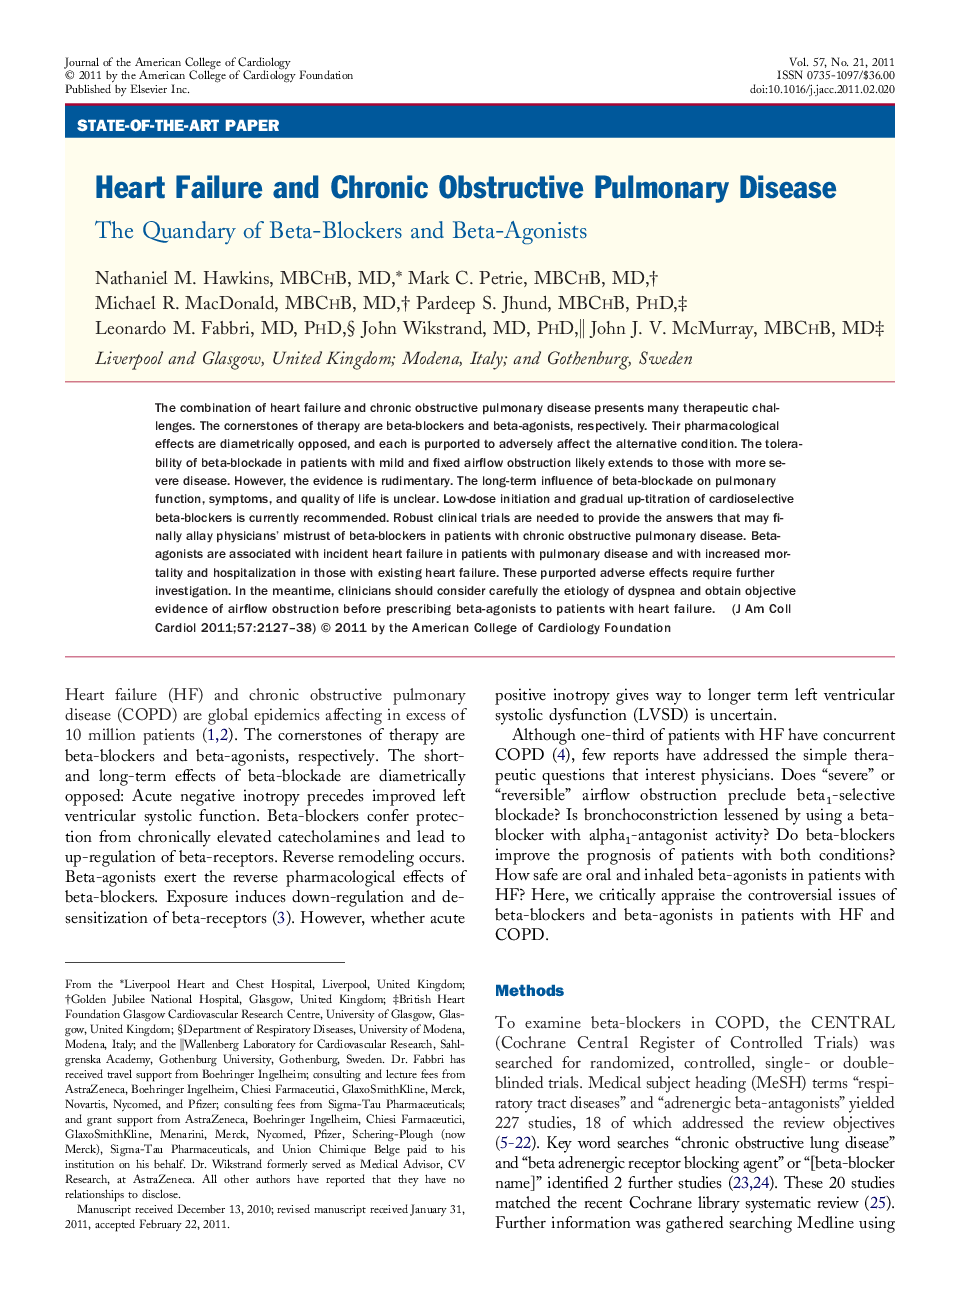 Heart Failure and Chronic Obstructive Pulmonary Disease : The Quandary of Beta-Blockers and Beta-Agonists